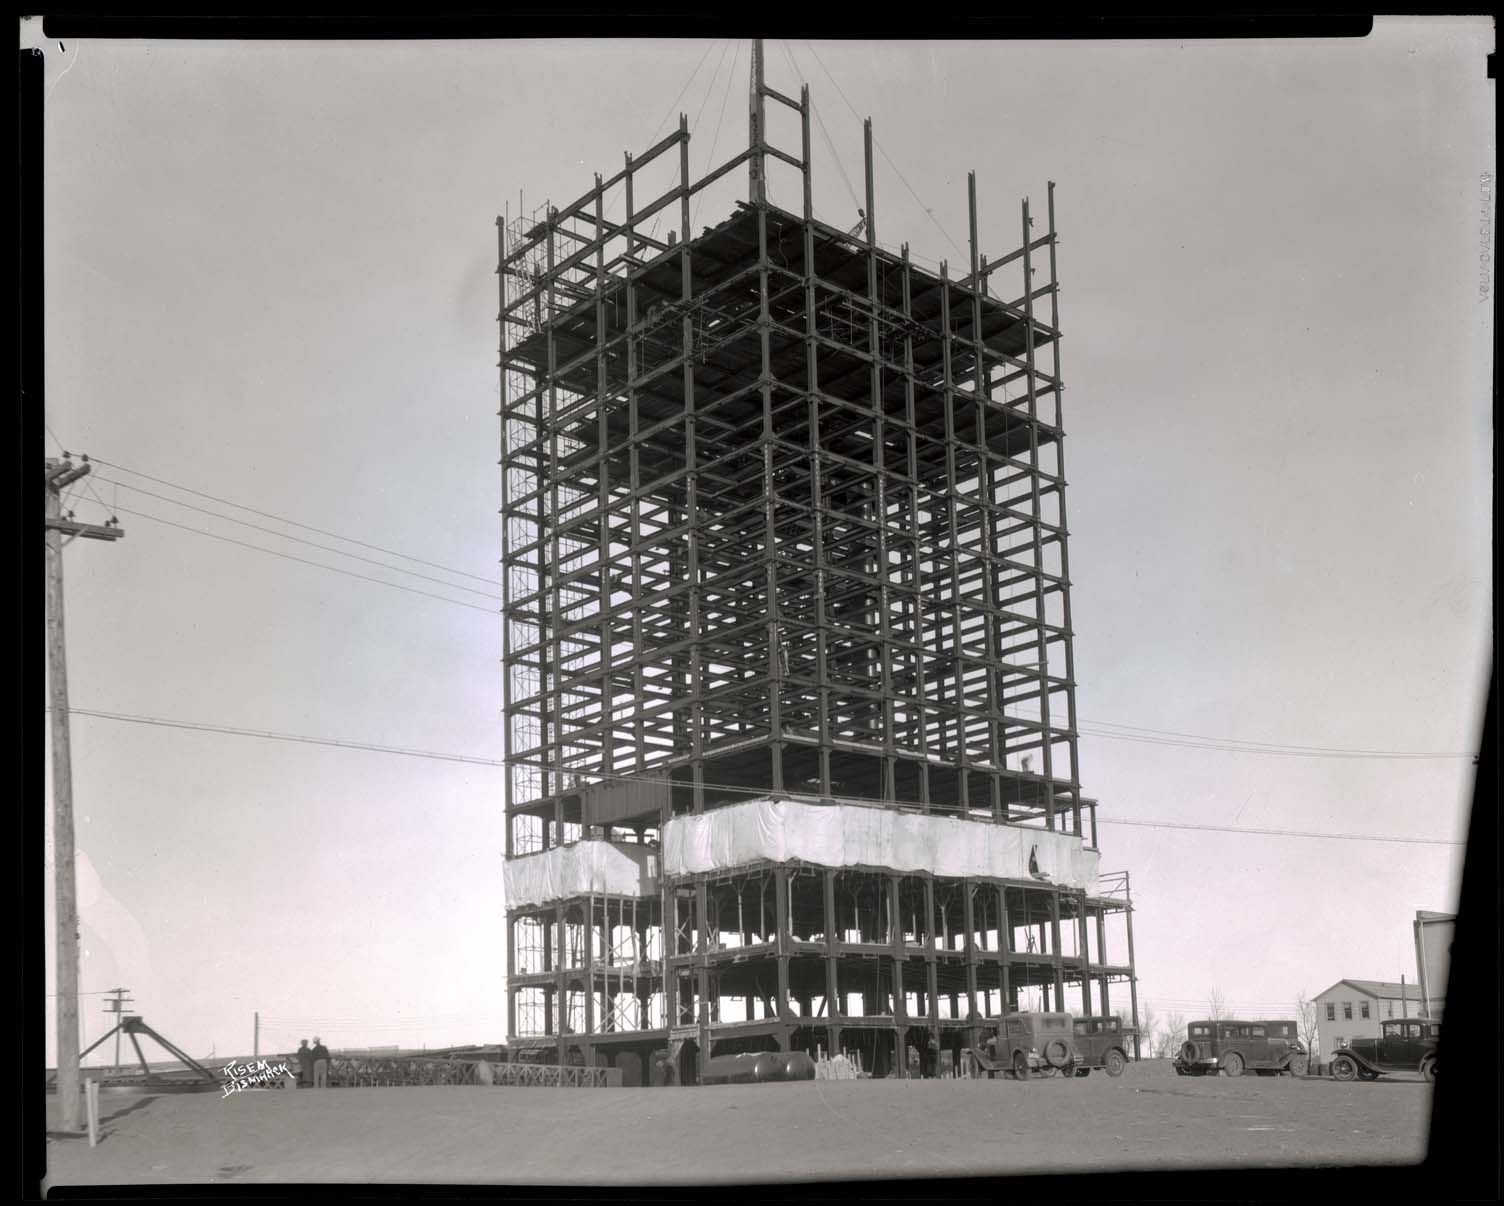 Construction of the New Capitol